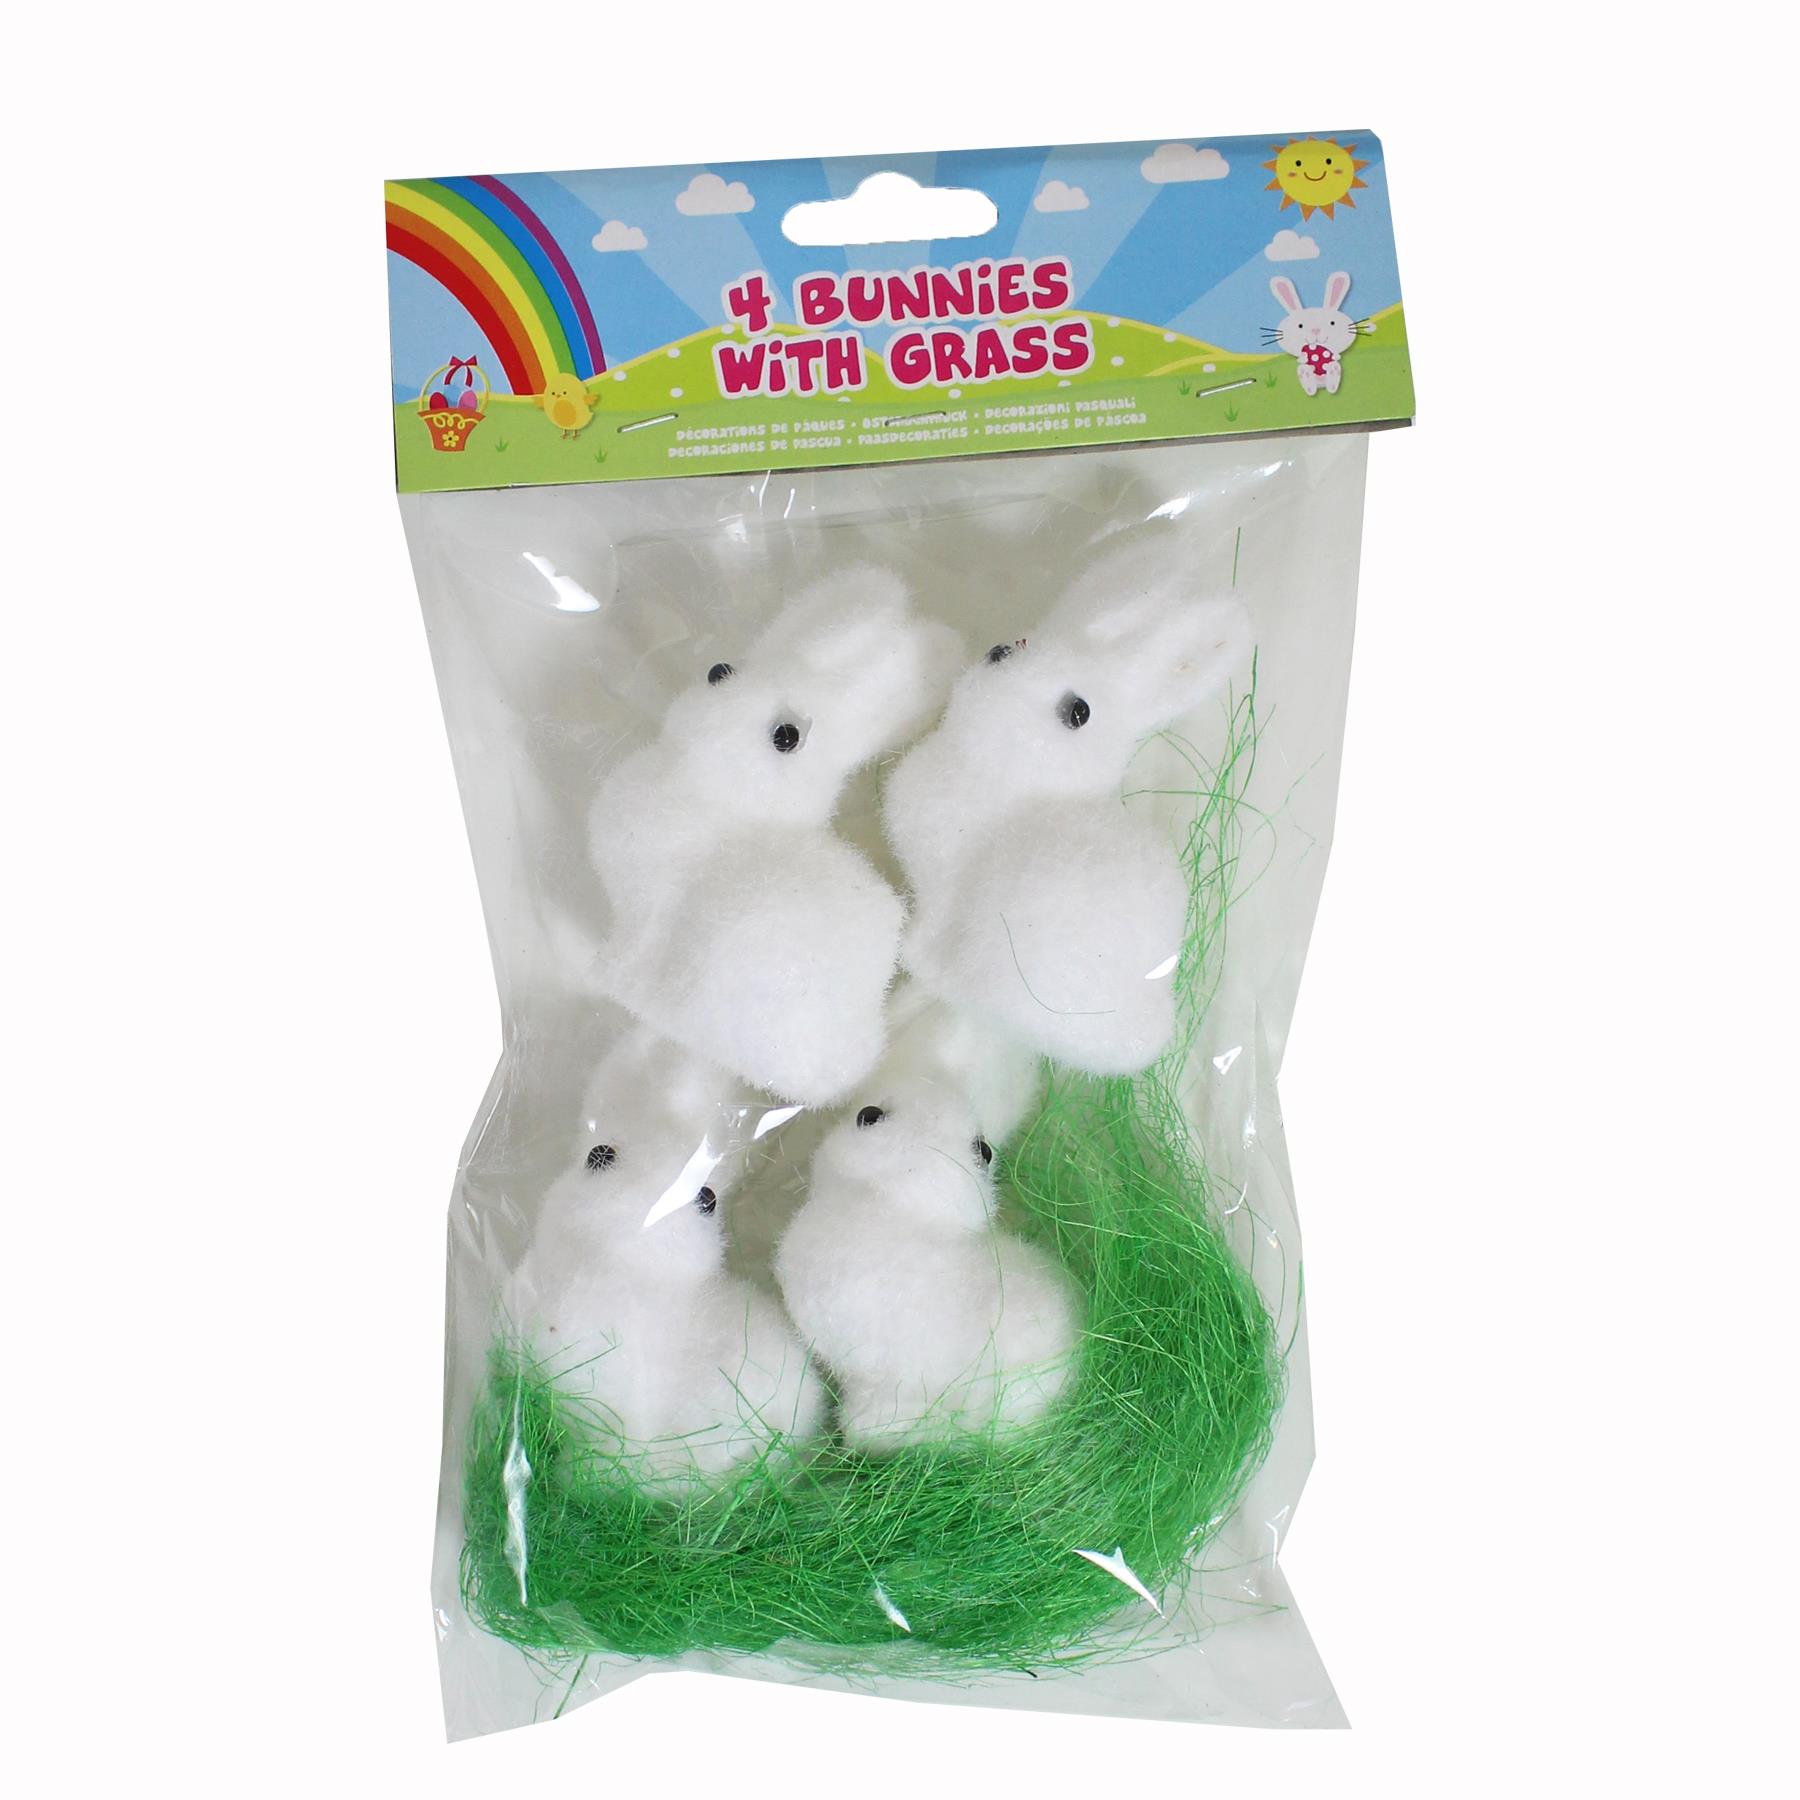 Easter Decorations, Bonnet Making, Arts and Crafts - 4 White Bunnies Grass